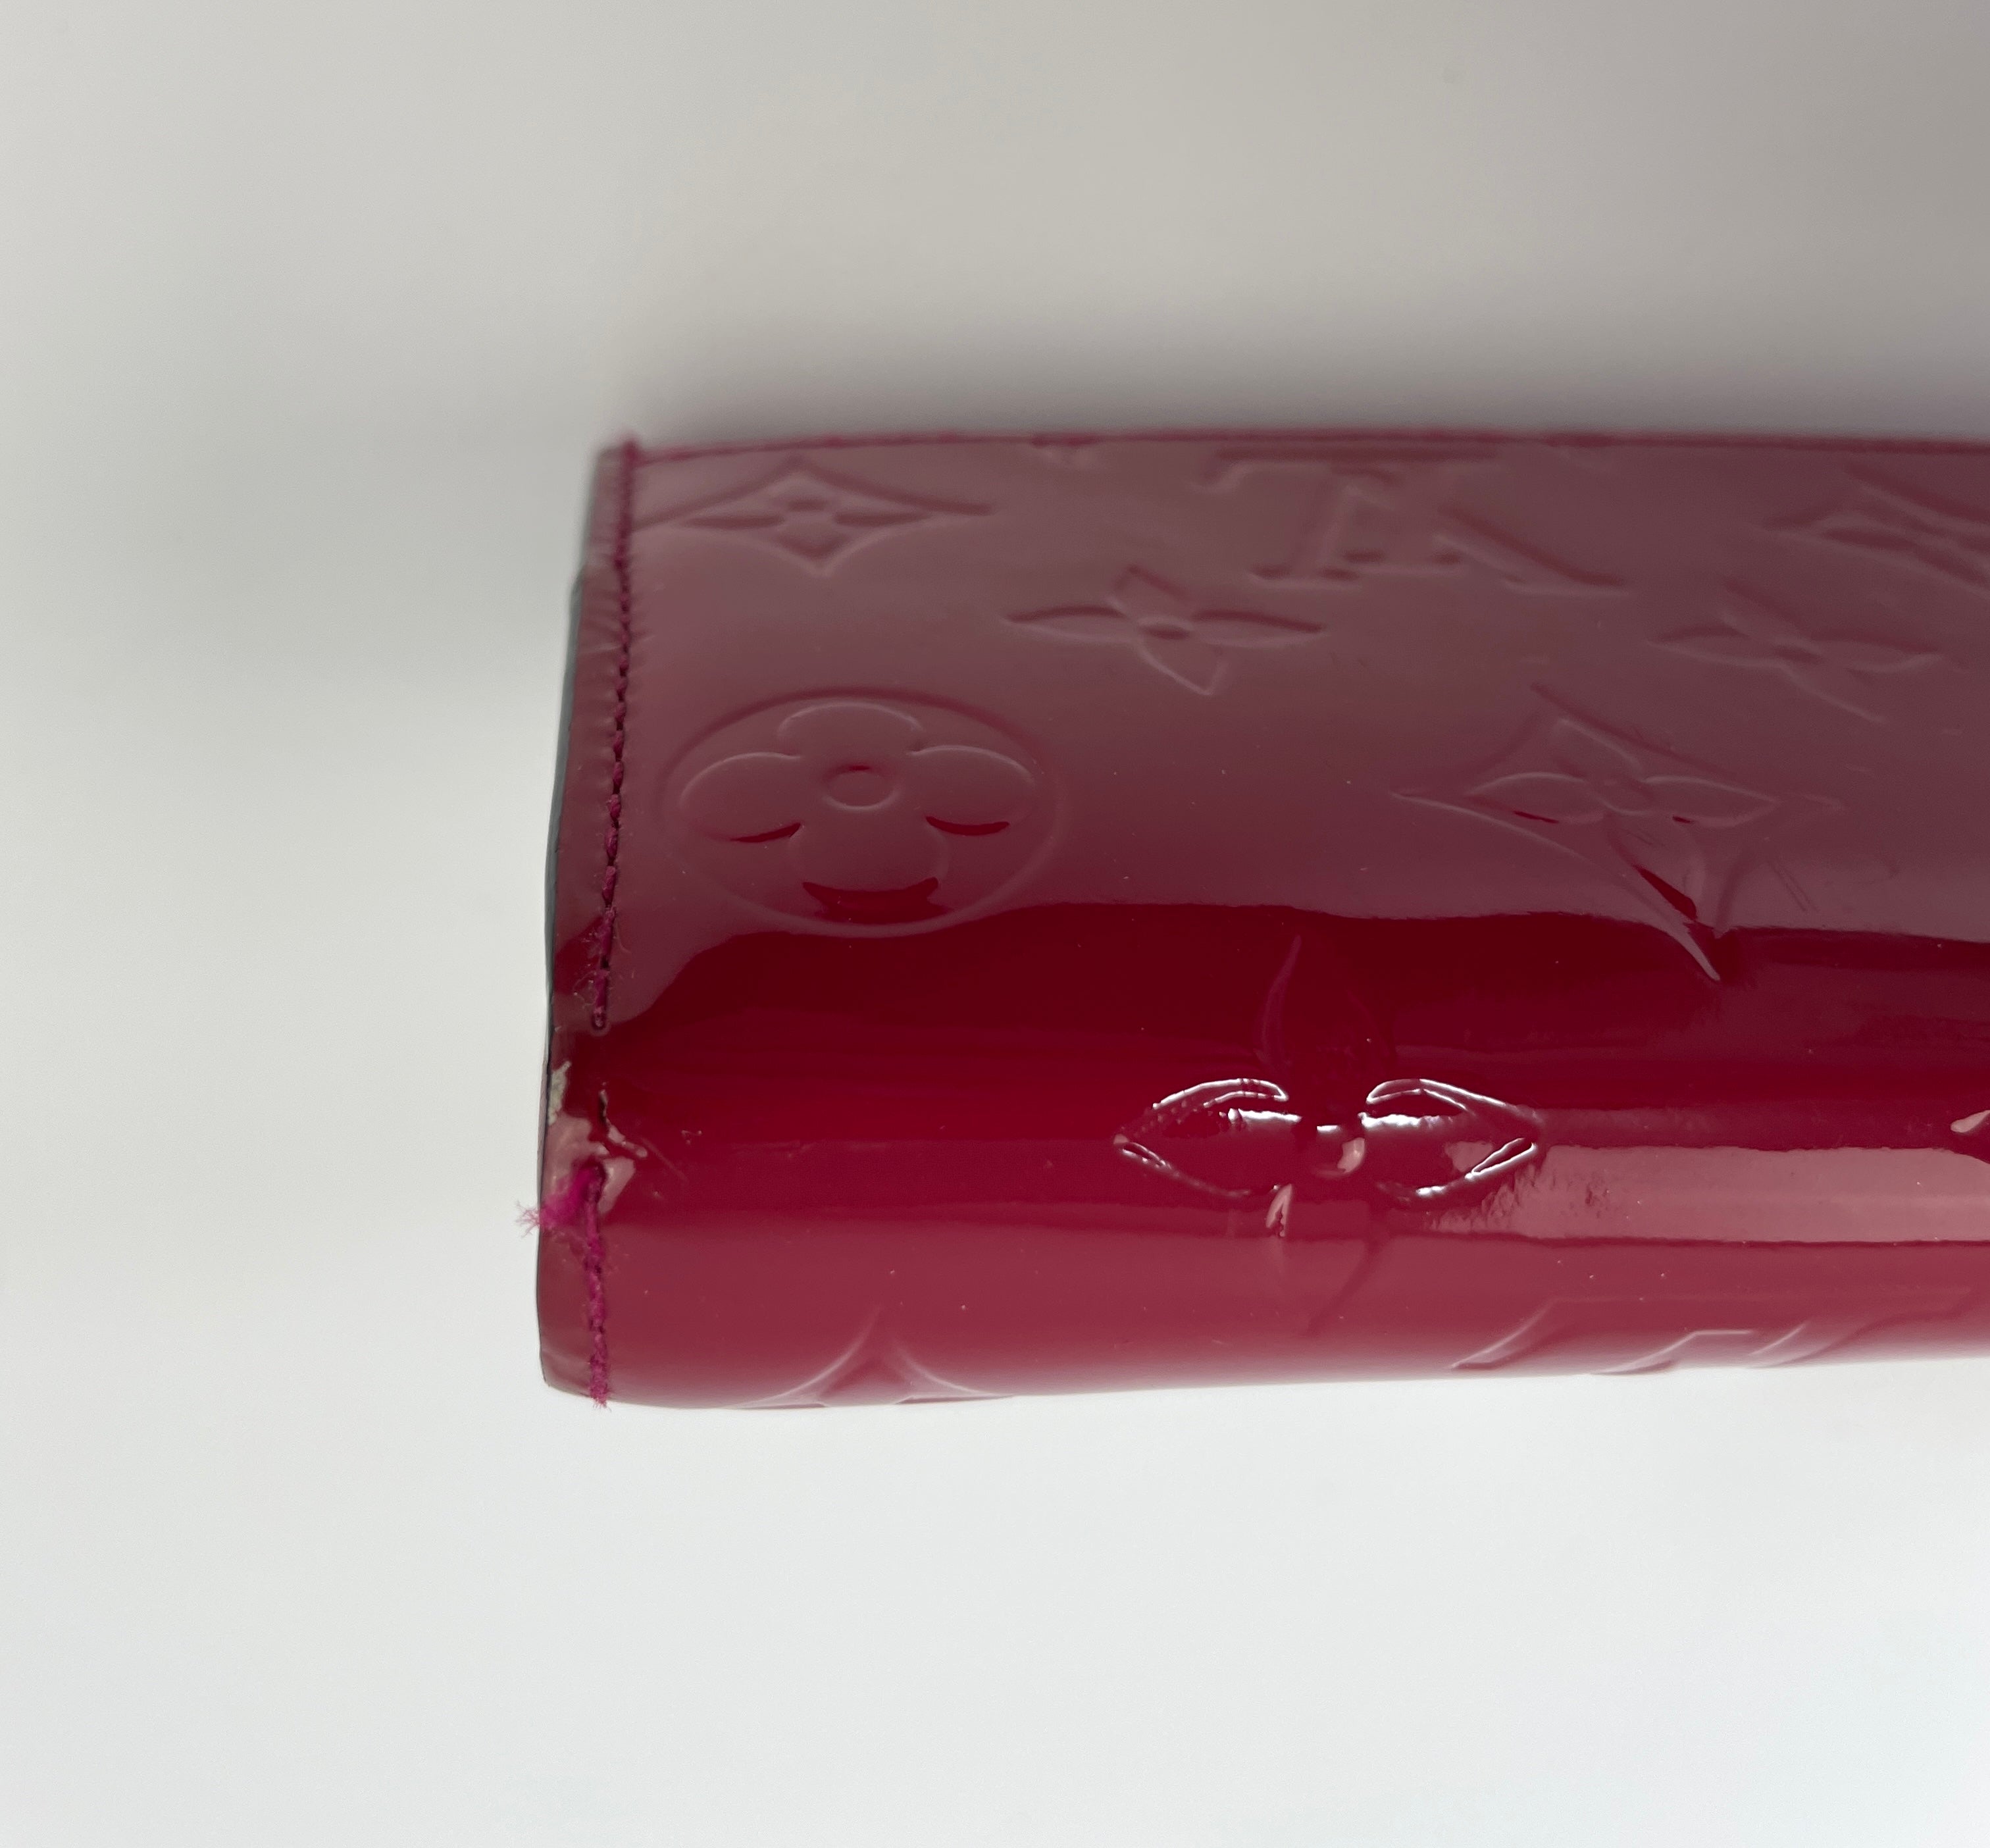 vernis leather wallet